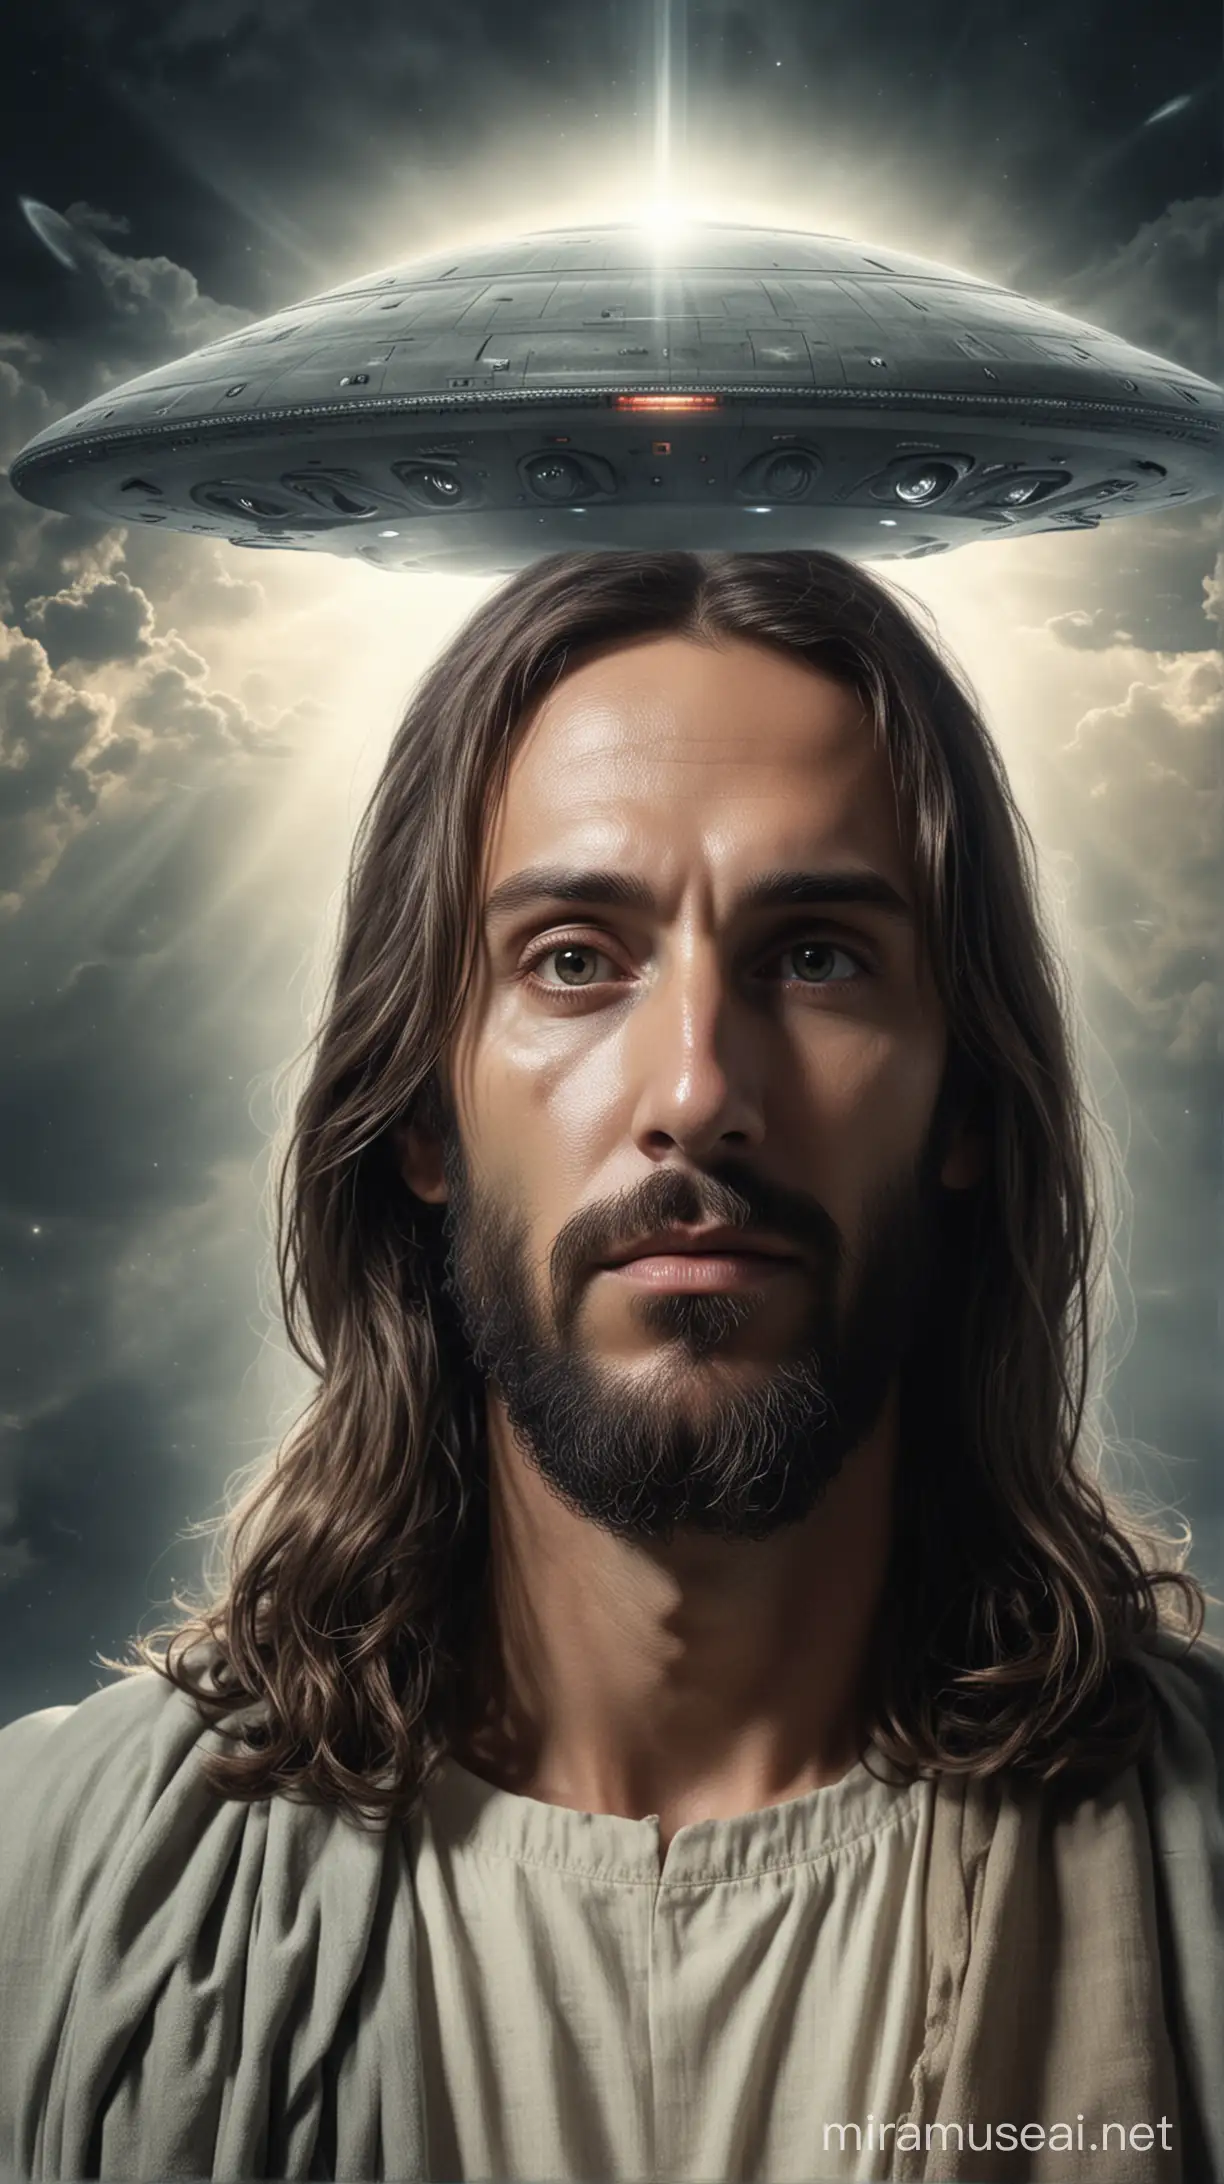 Jesus with a gray alien face transported by a UFO